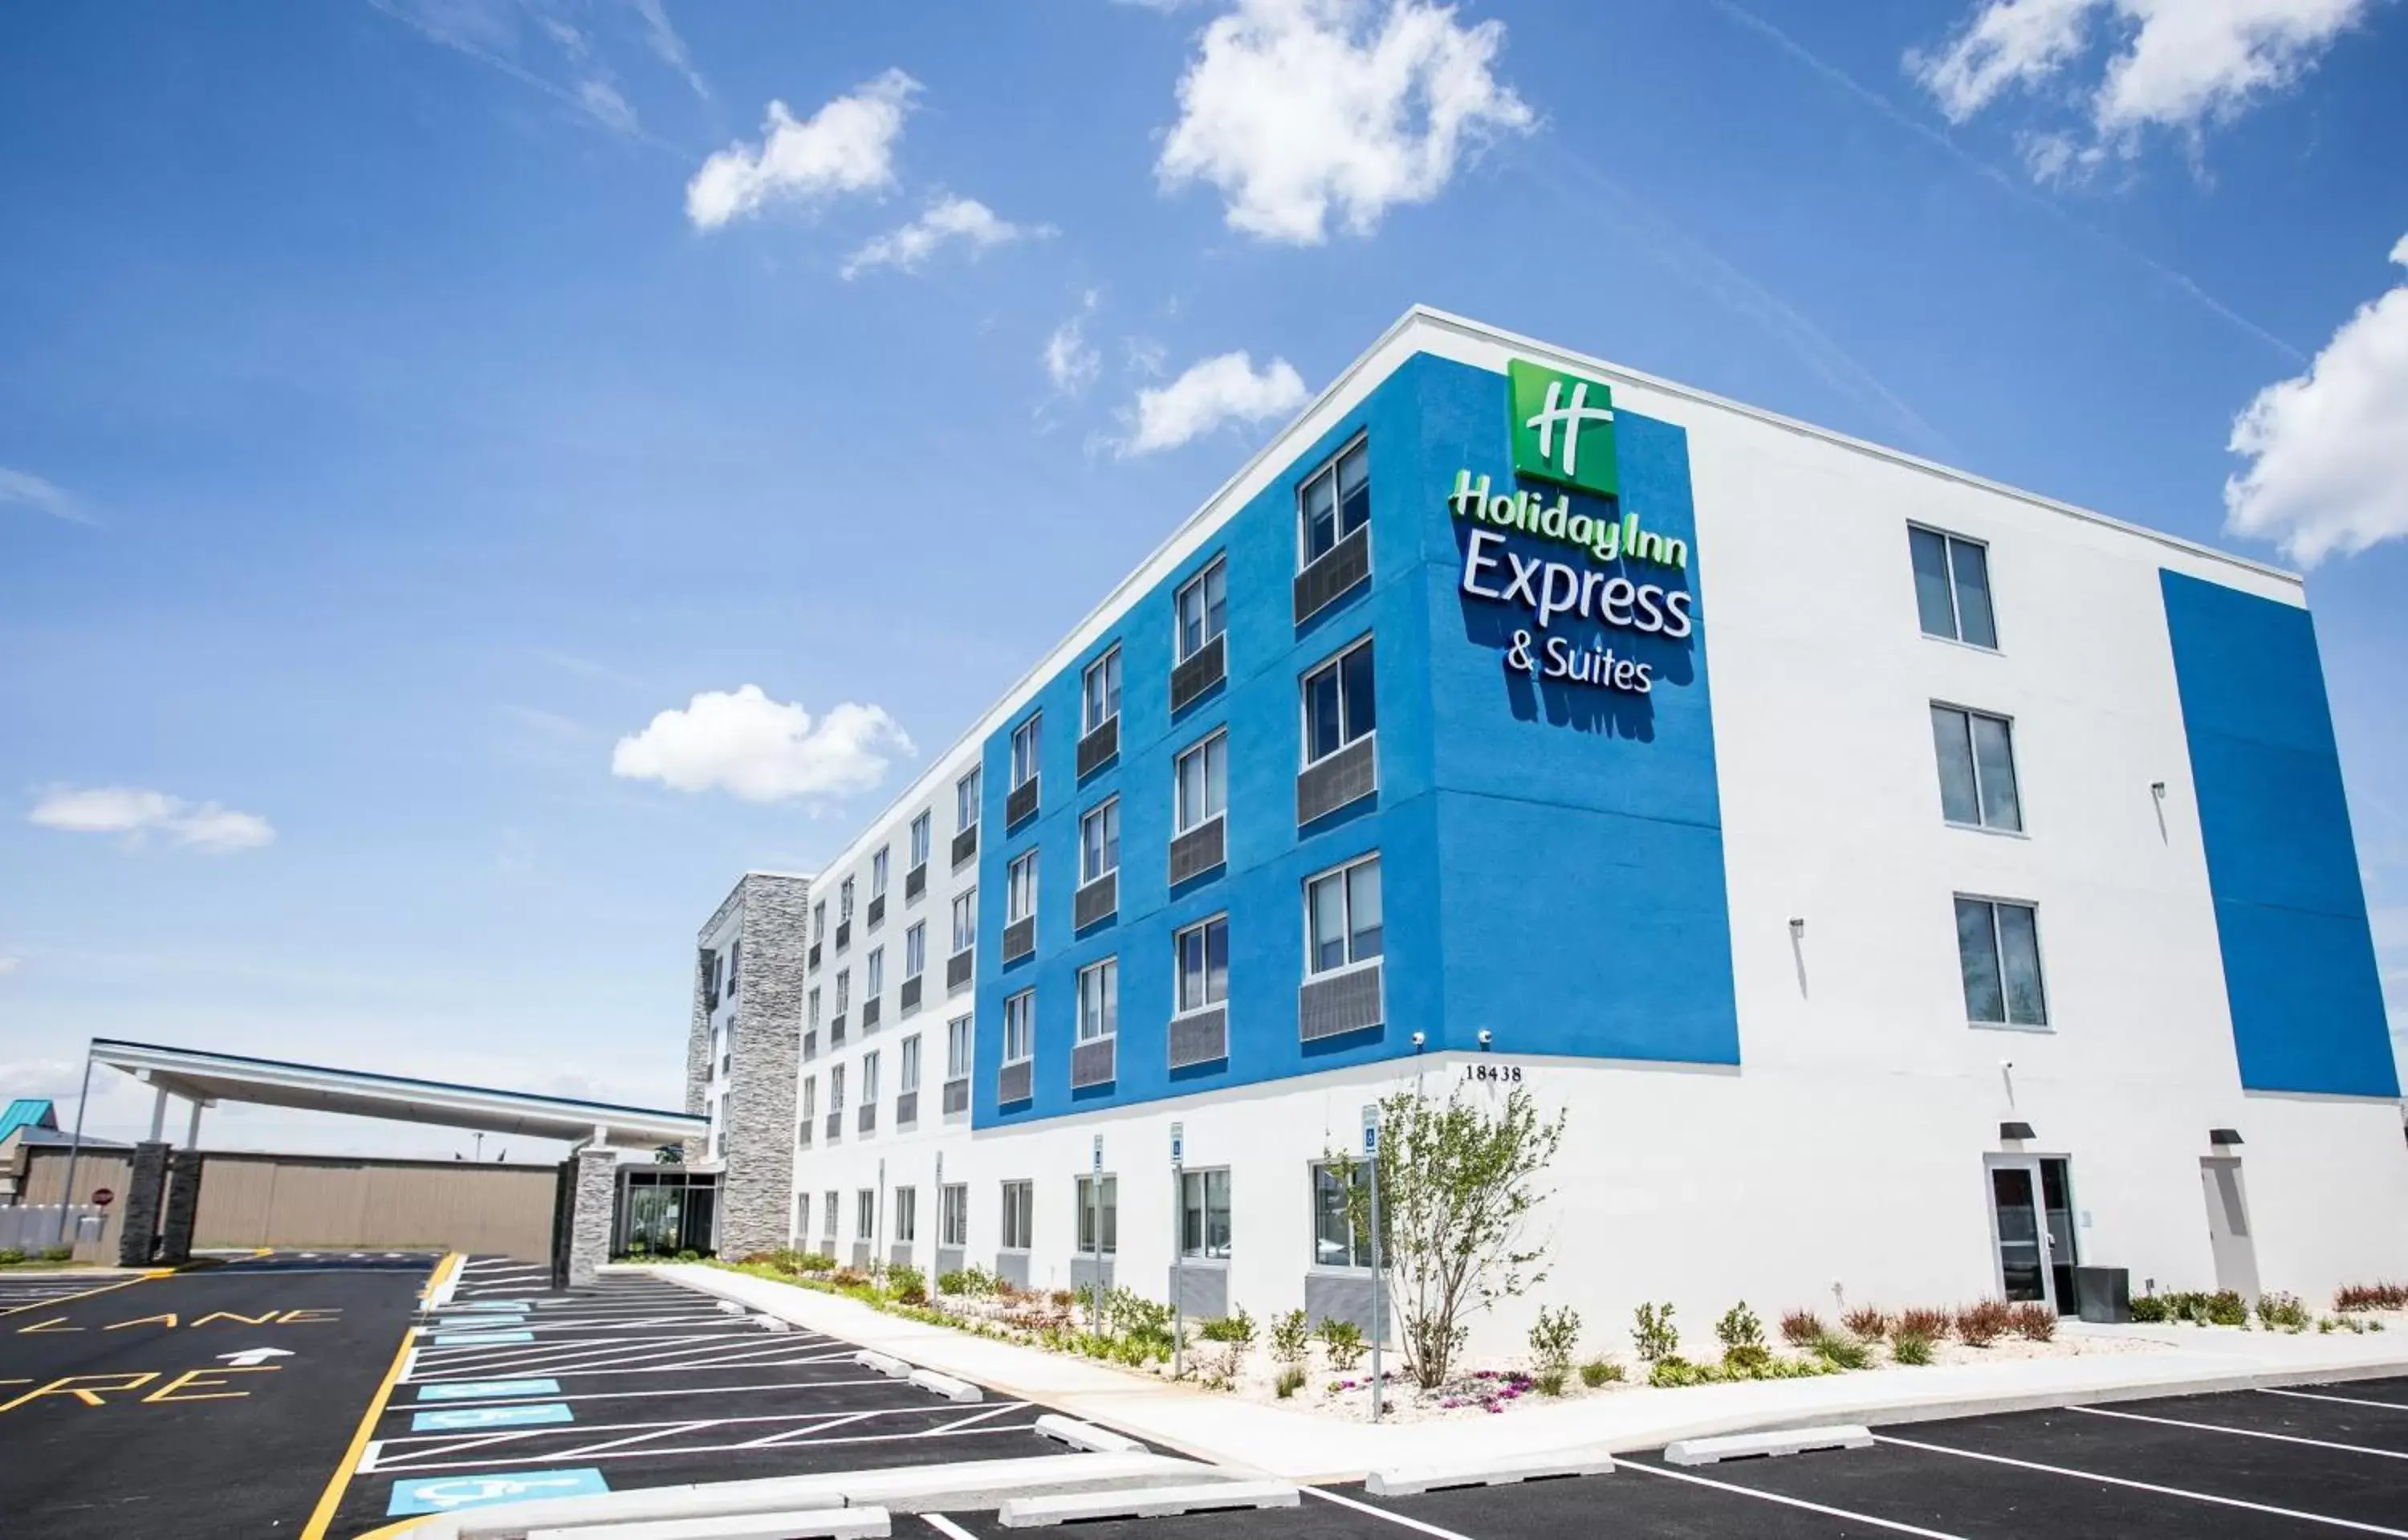 Property building in Holiday Inn Express & Suites Rehoboth Beach, an IHG Hotel